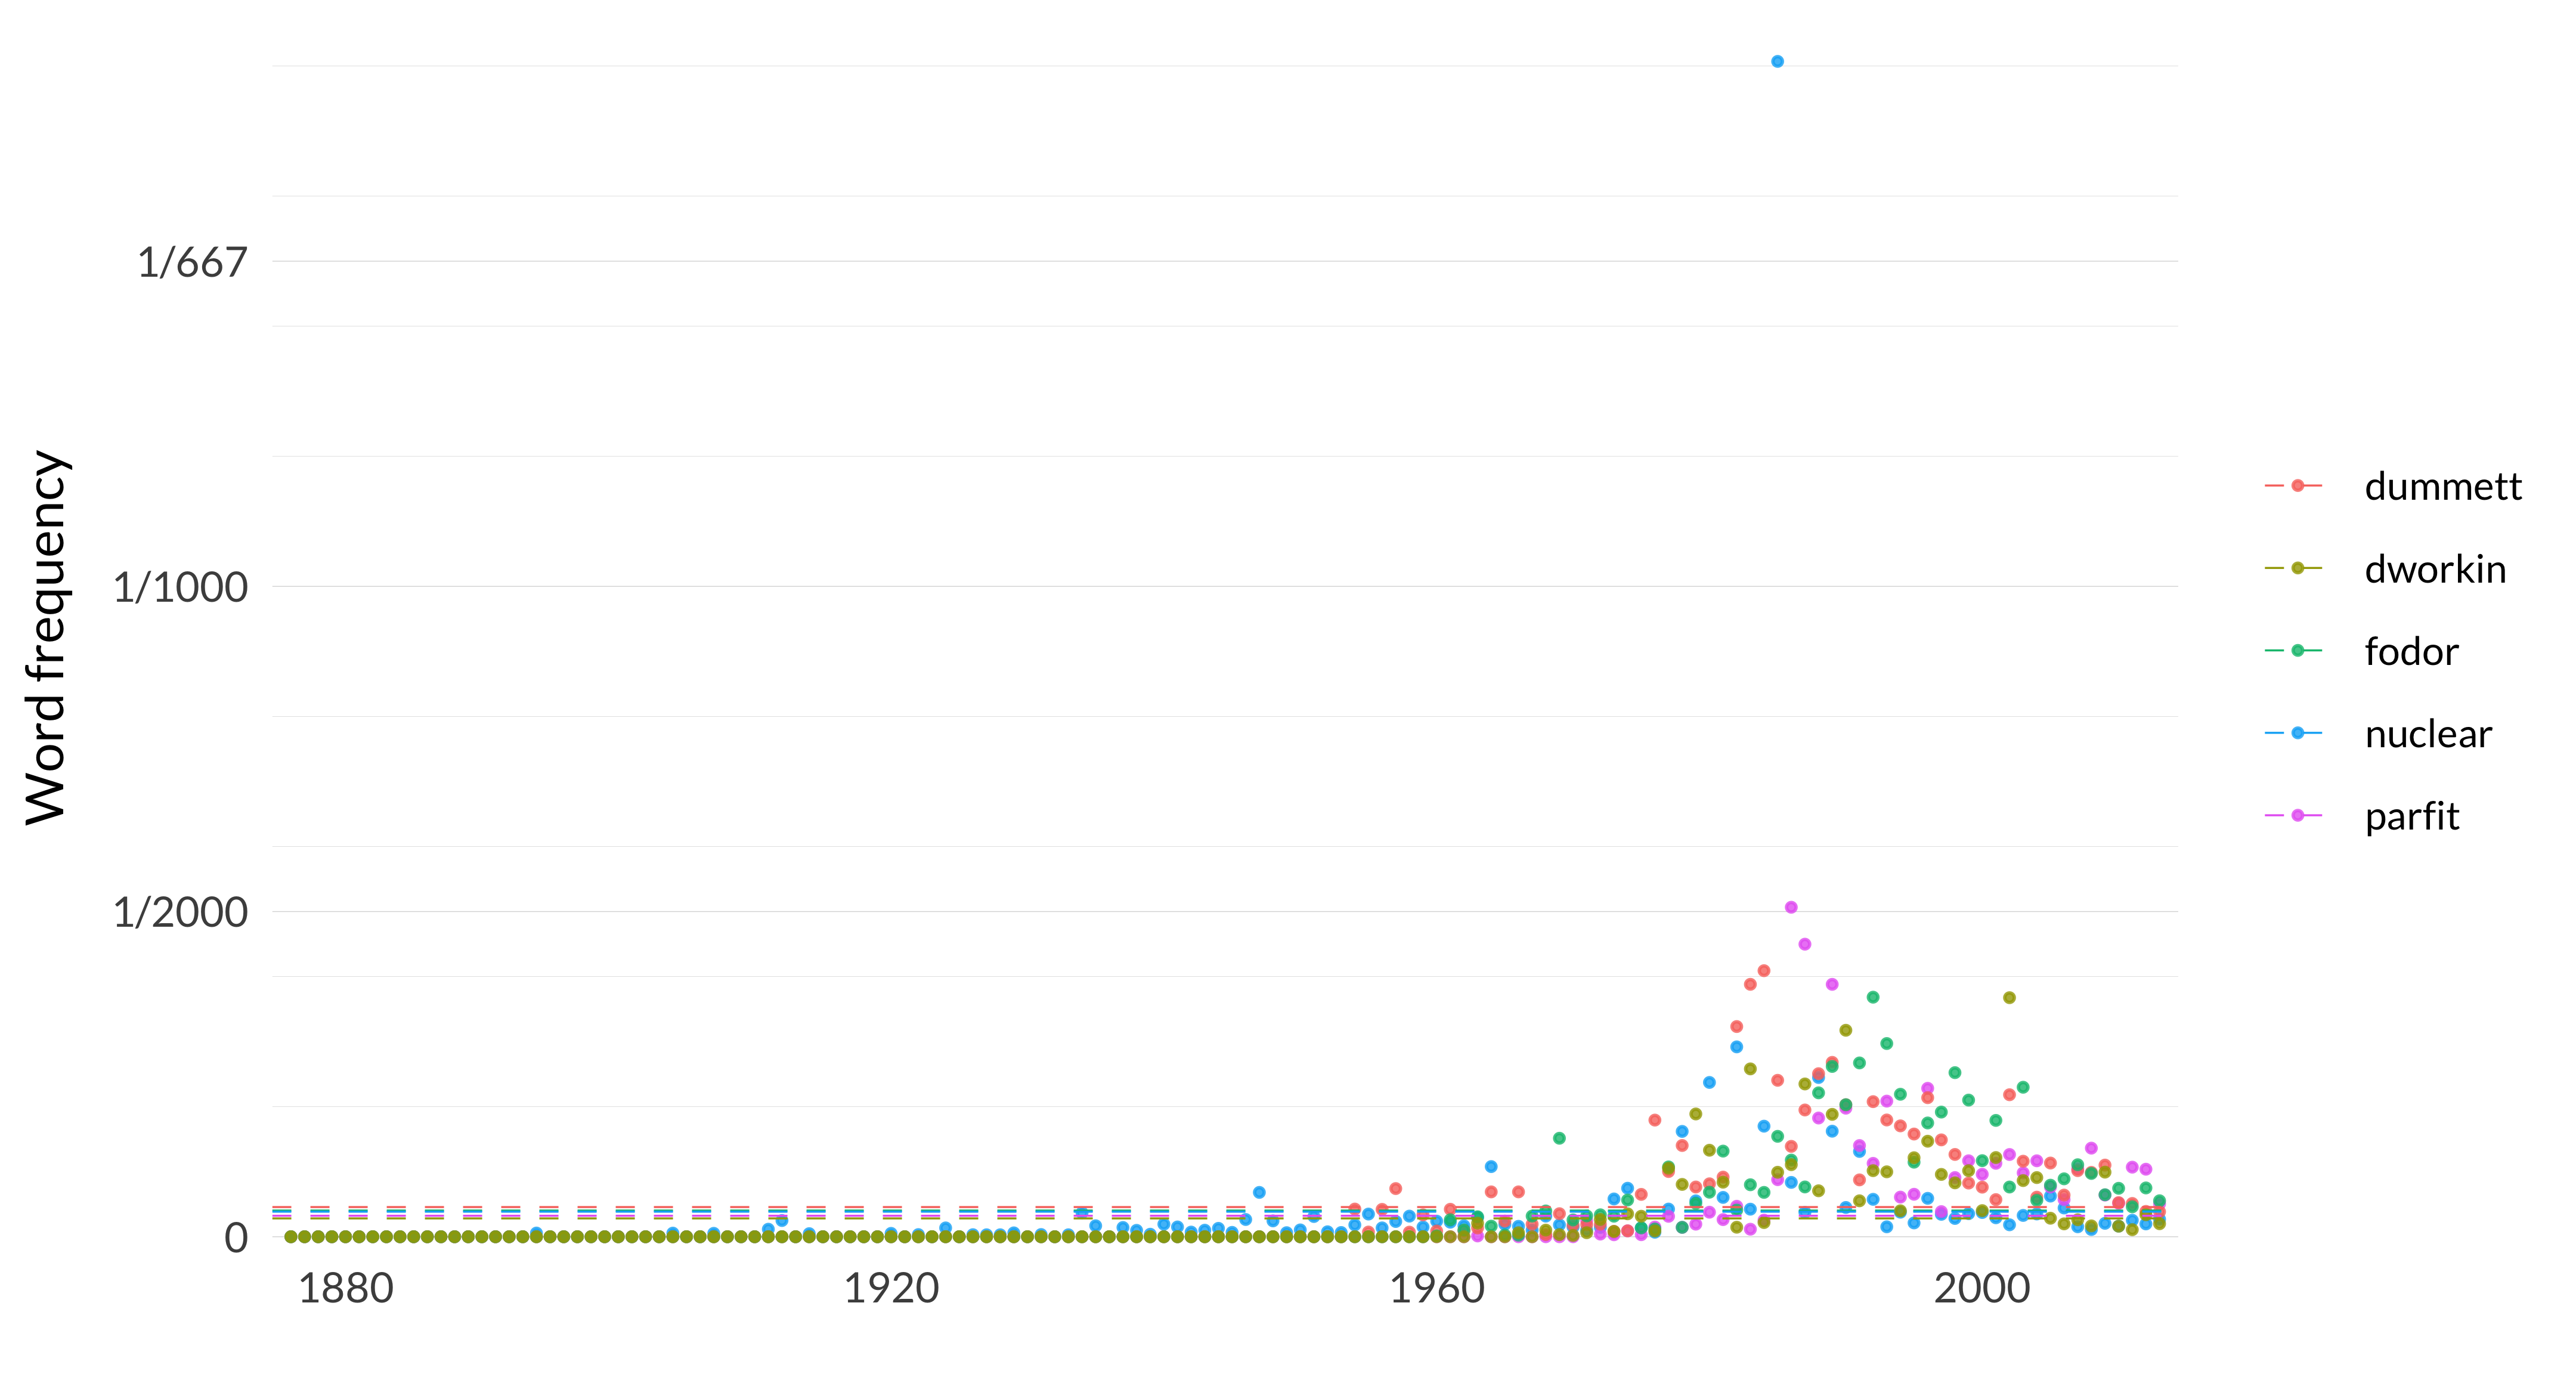 A scatterplot showing the frequency of the words nuclear, parfit, dummett, fodor, dworkin. The word nuclear appears, on average across the years, 39 times per million words, and in the median year, it appears 12 times per million words. Its most frequent occurrence is in 1985 when it appears 1807 times per million words, and its least frequent occurrence is in 1876 when it appears 0 times per million words. The word parfit appears, on average across the years, 32 times per million words, and in the median year, it appears 0 times per million words. Its most frequent occurrence is in 1986 when it appears 507 times per million words, and its least frequent occurrence is in 1876 when it appears 0 times per million words. The word dummett appears, on average across the years, 46 times per million words, and in the median year, it appears 0 times per million words. Its most frequent occurrence is in 1984 when it appears 409 times per million words, and its least frequent occurrence is in 1876 when it appears 0 times per million words. The word fodor appears, on average across the years, 40 times per million words, and in the median year, it appears 0 times per million words. Its most frequent occurrence is in 1992 when it appears 368 times per million words, and its least frequent occurrence is in 1876 when it appears 0 times per million words. The word dworkin appears, on average across the years, 28 times per million words, and in the median year, it appears 0 times per million words. Its most frequent occurrence is in 2002 when it appears 368 times per million words, and its least frequent occurrence is in 1876 when it appears 0 times per million words. 